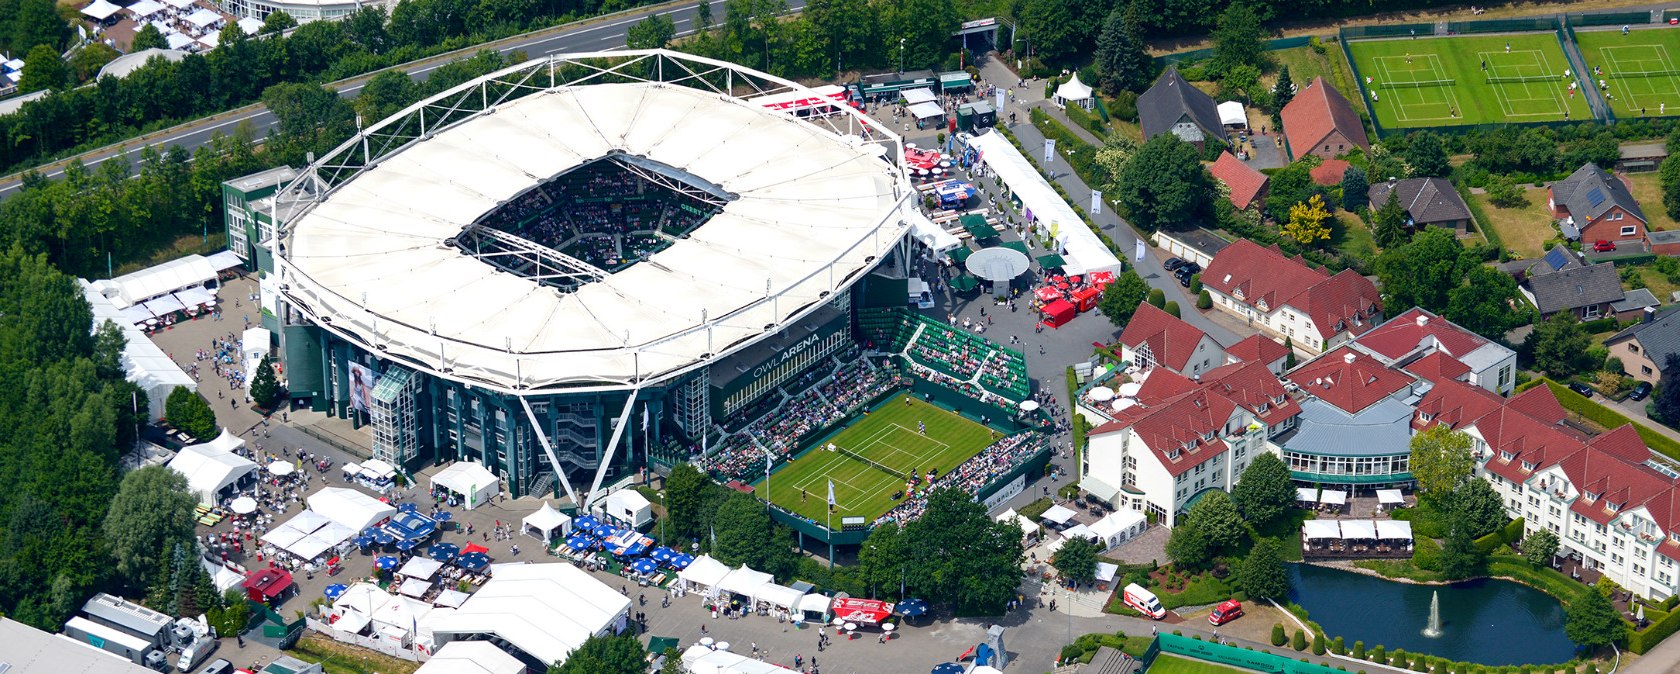 OWL Arena in Halle, © OWL Arena